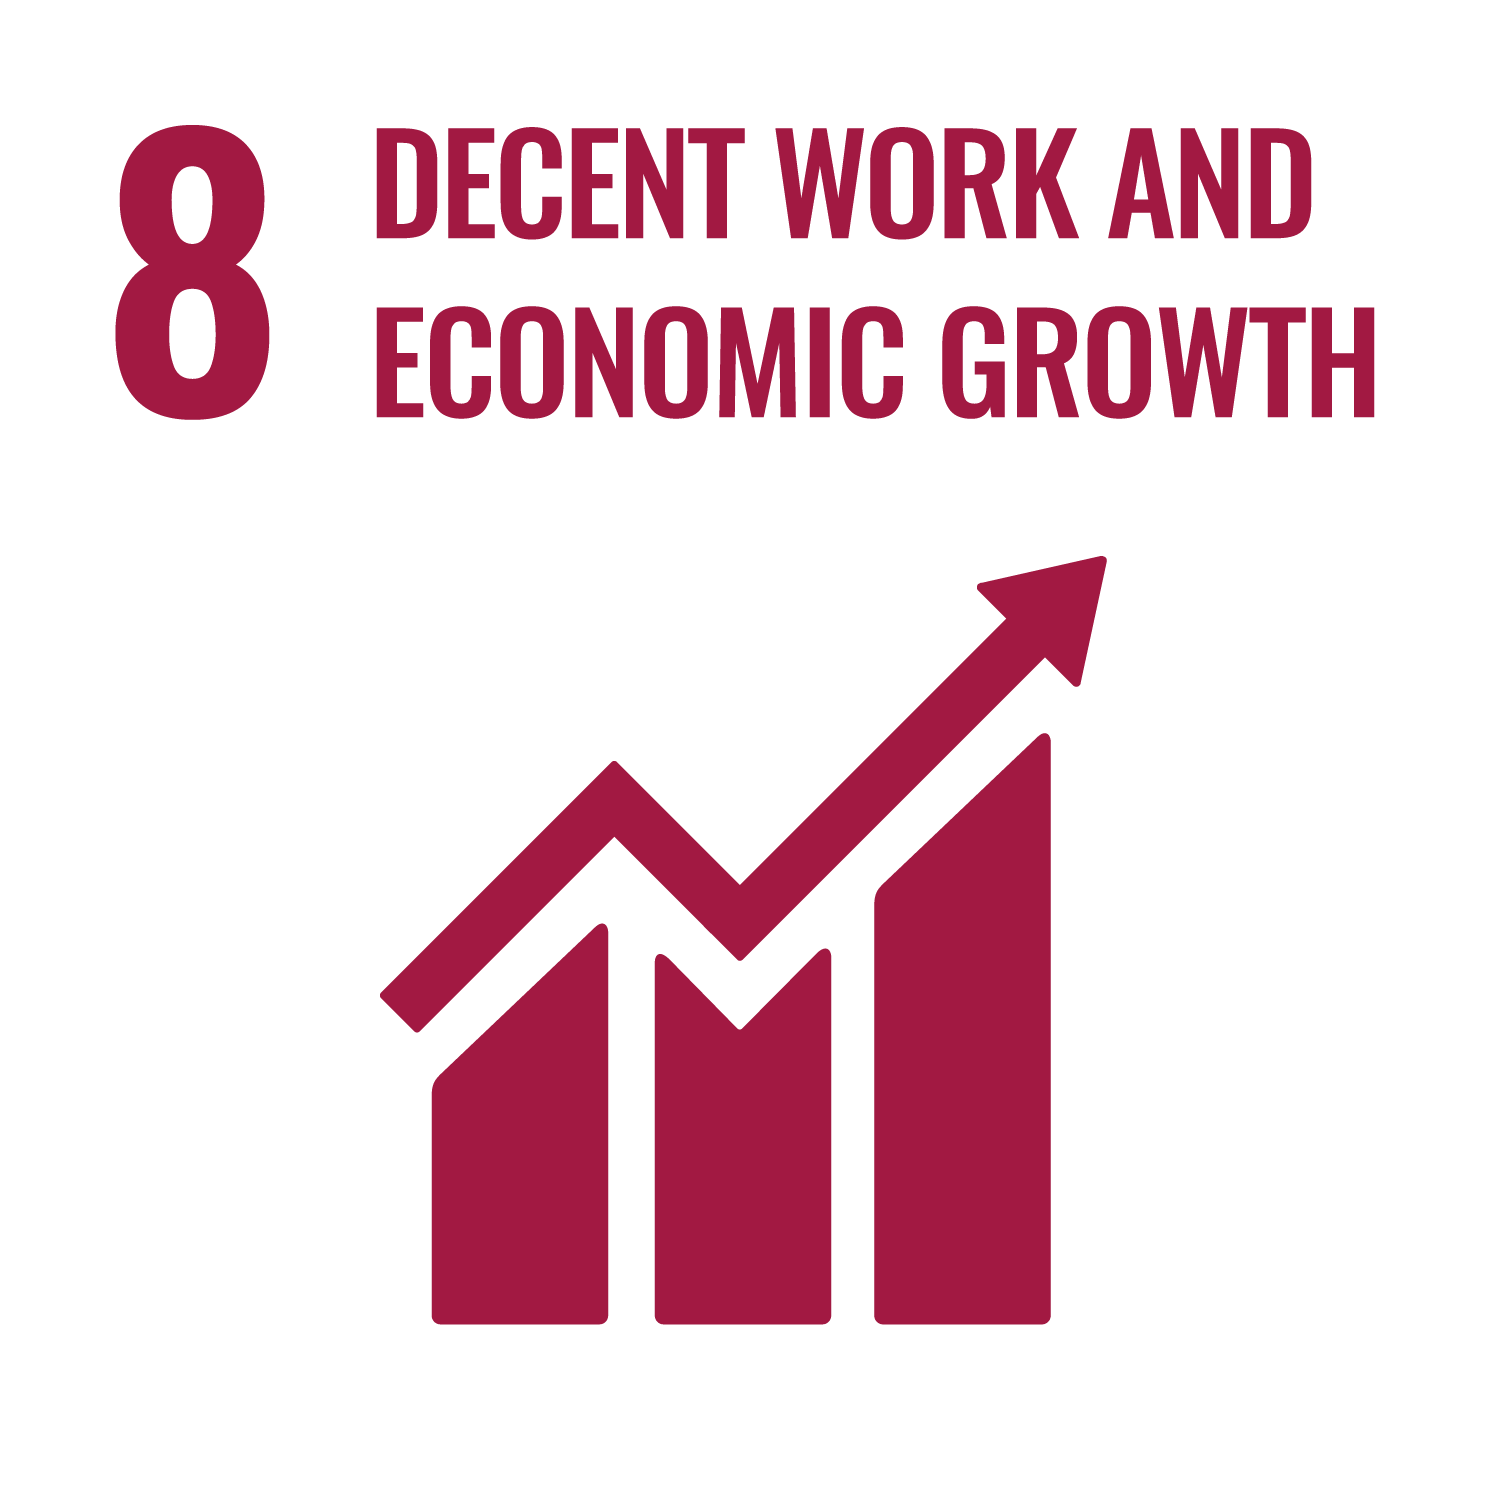 Goal 8: Promote sustained, inclusive, and sustainable economic growth, full and productive employment, and decent work for all